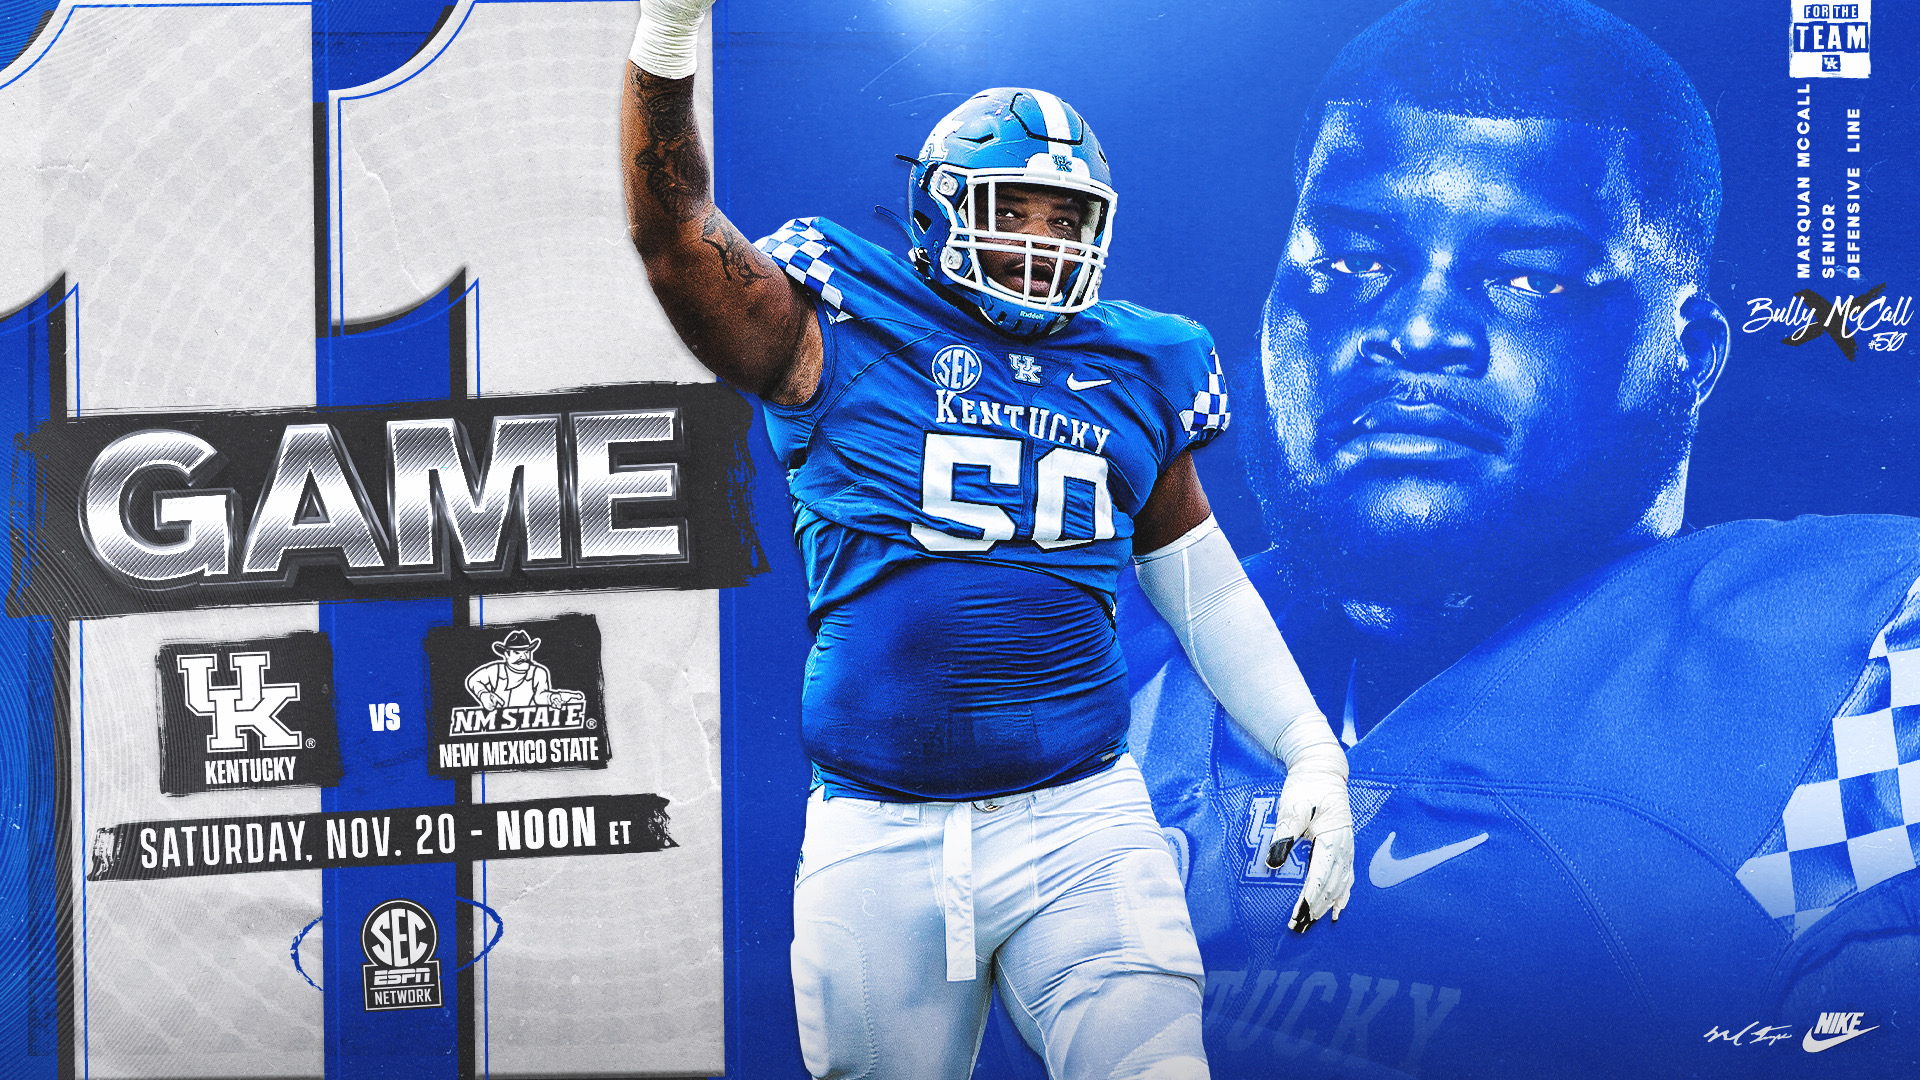 Kentucky Hosts New Mexico State on Senior Day